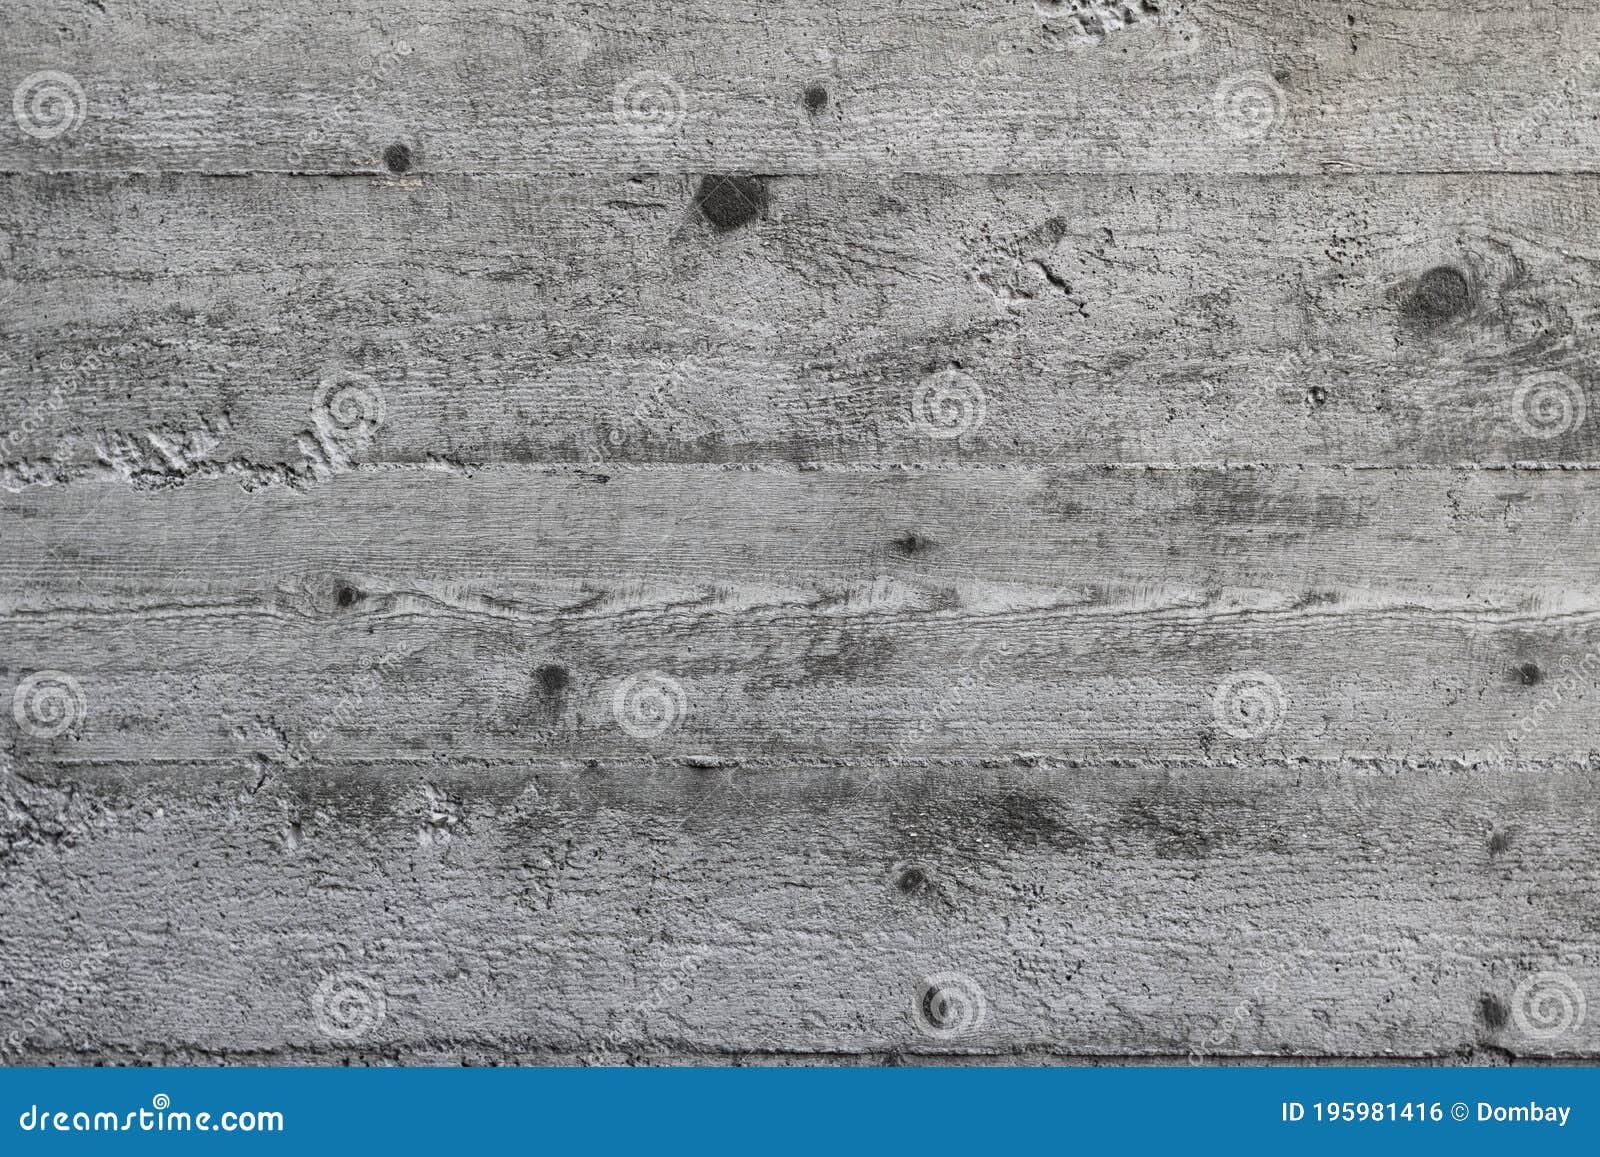 Avenge Word On Concrette Wall Stock Photo, Picture and Royalty Free Image.  Image 51578394.